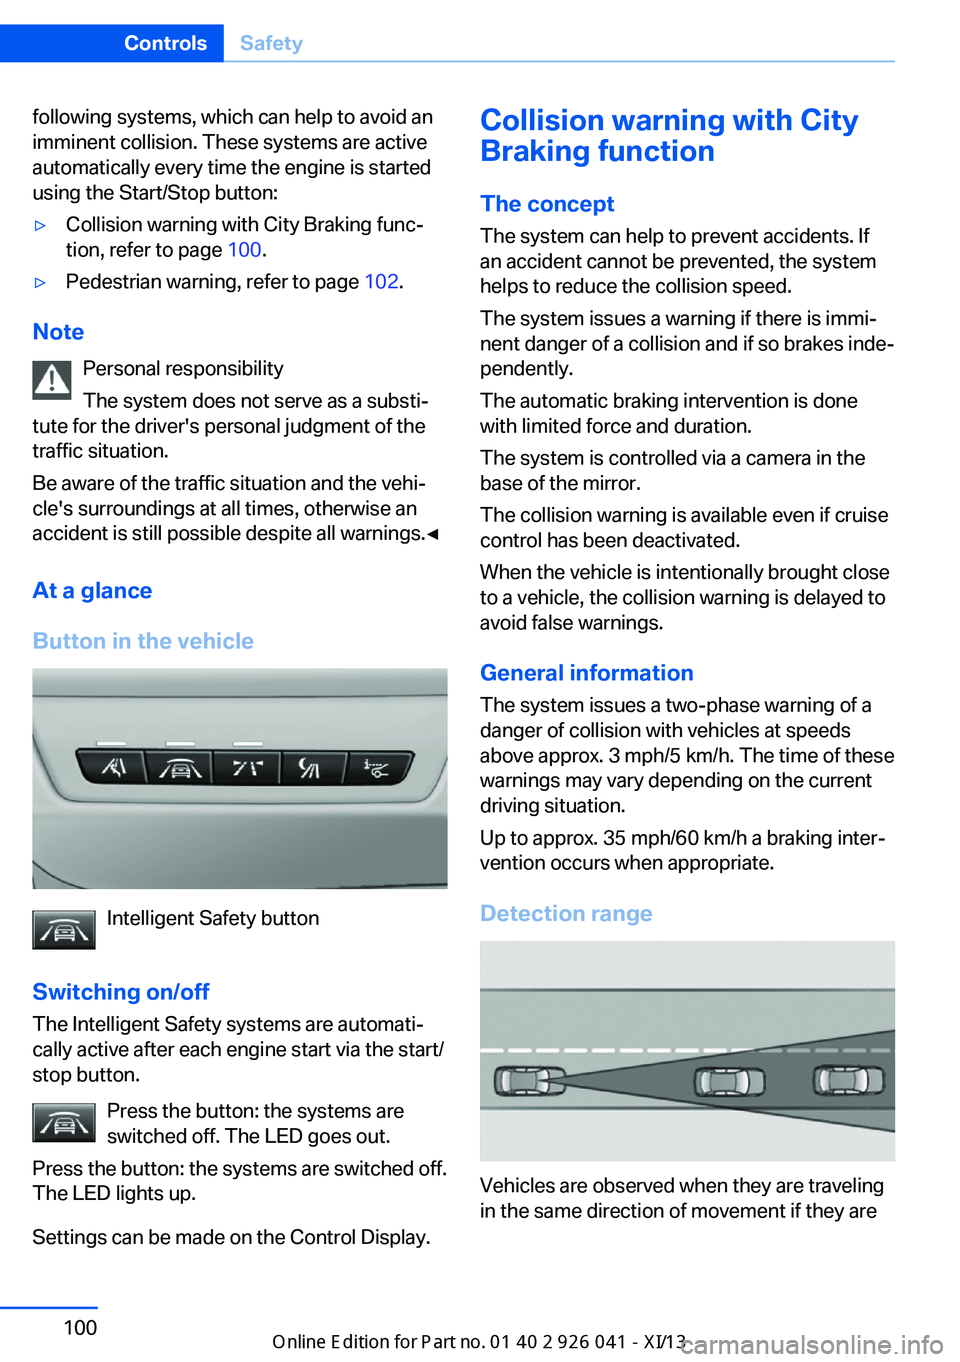 BMW M6 COUPE 2013 F13 Owners Manual following systems, which can help to avoid an
imminent collision. These systems are active
automatically every time the engine is started
using the Start/Stop button:▷Collision warning with City Bra